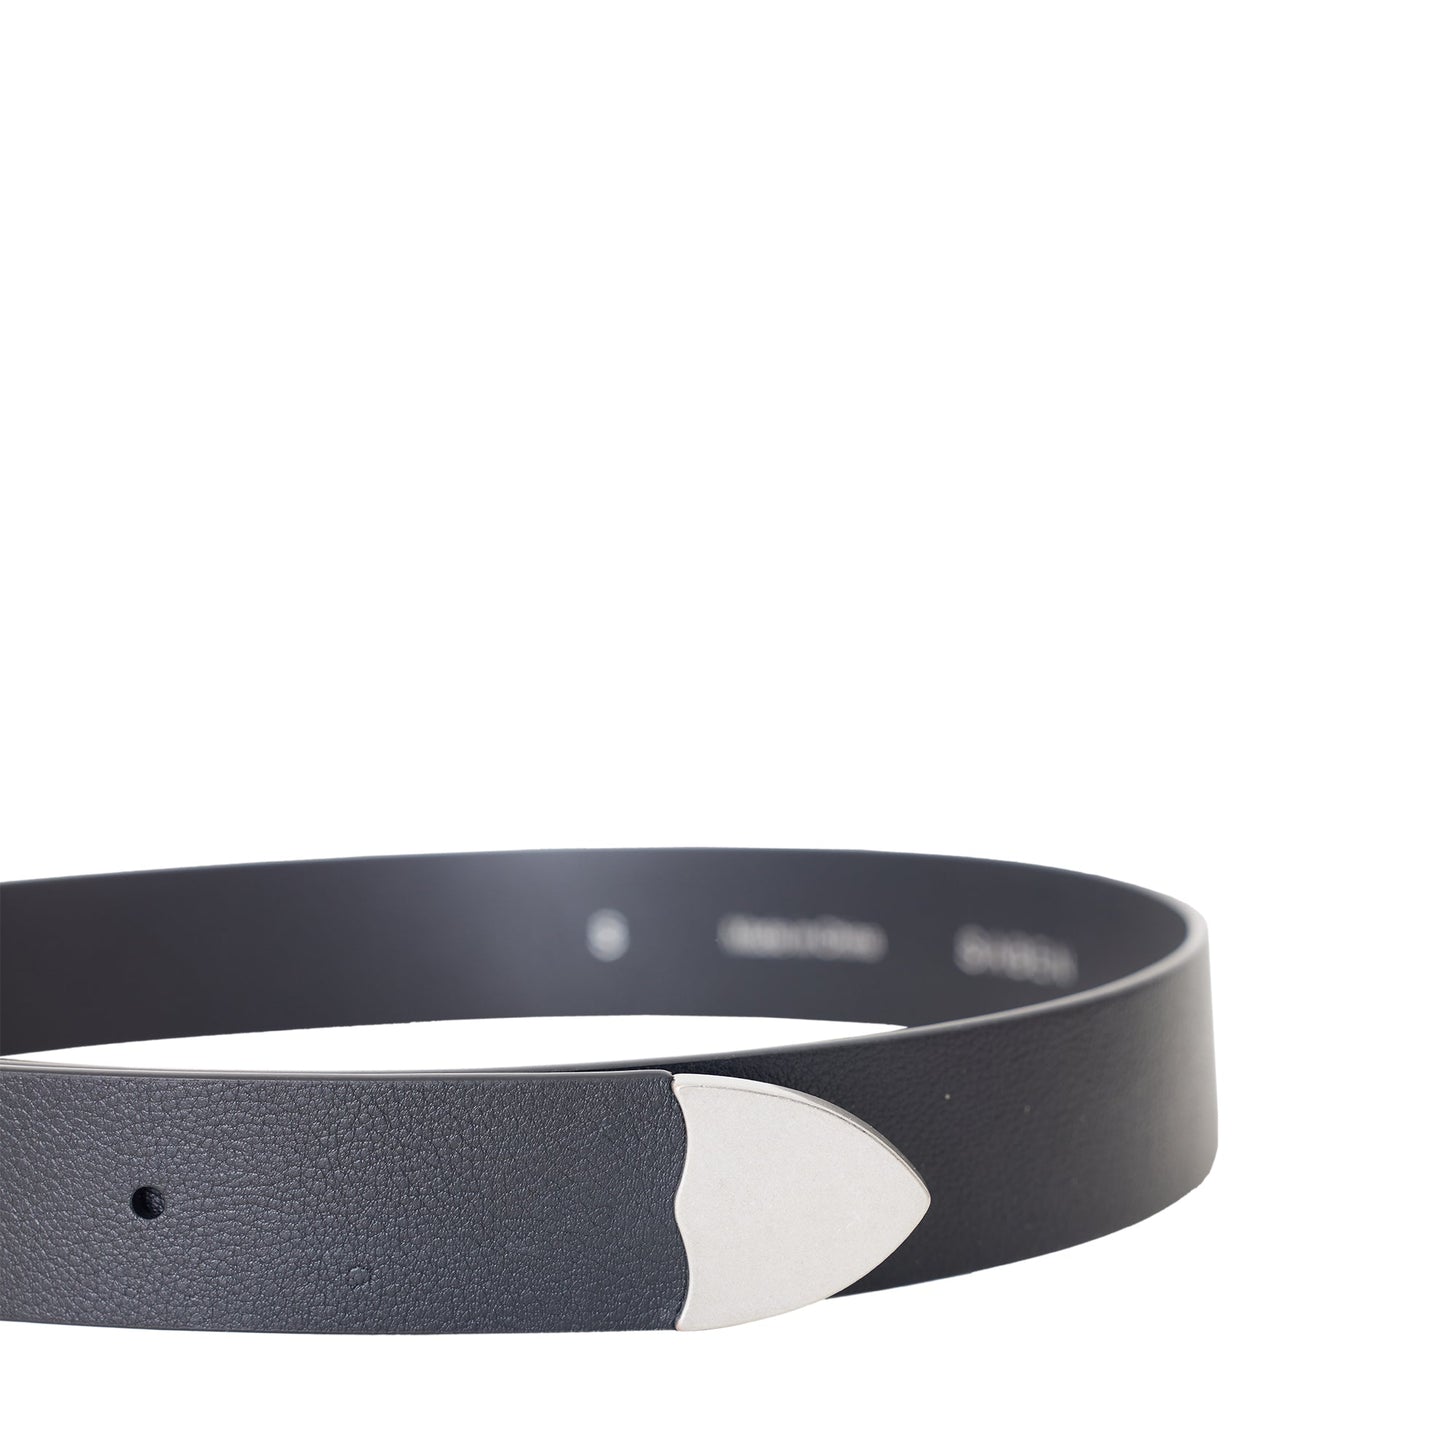 Cassidy Belt - Black and Silver